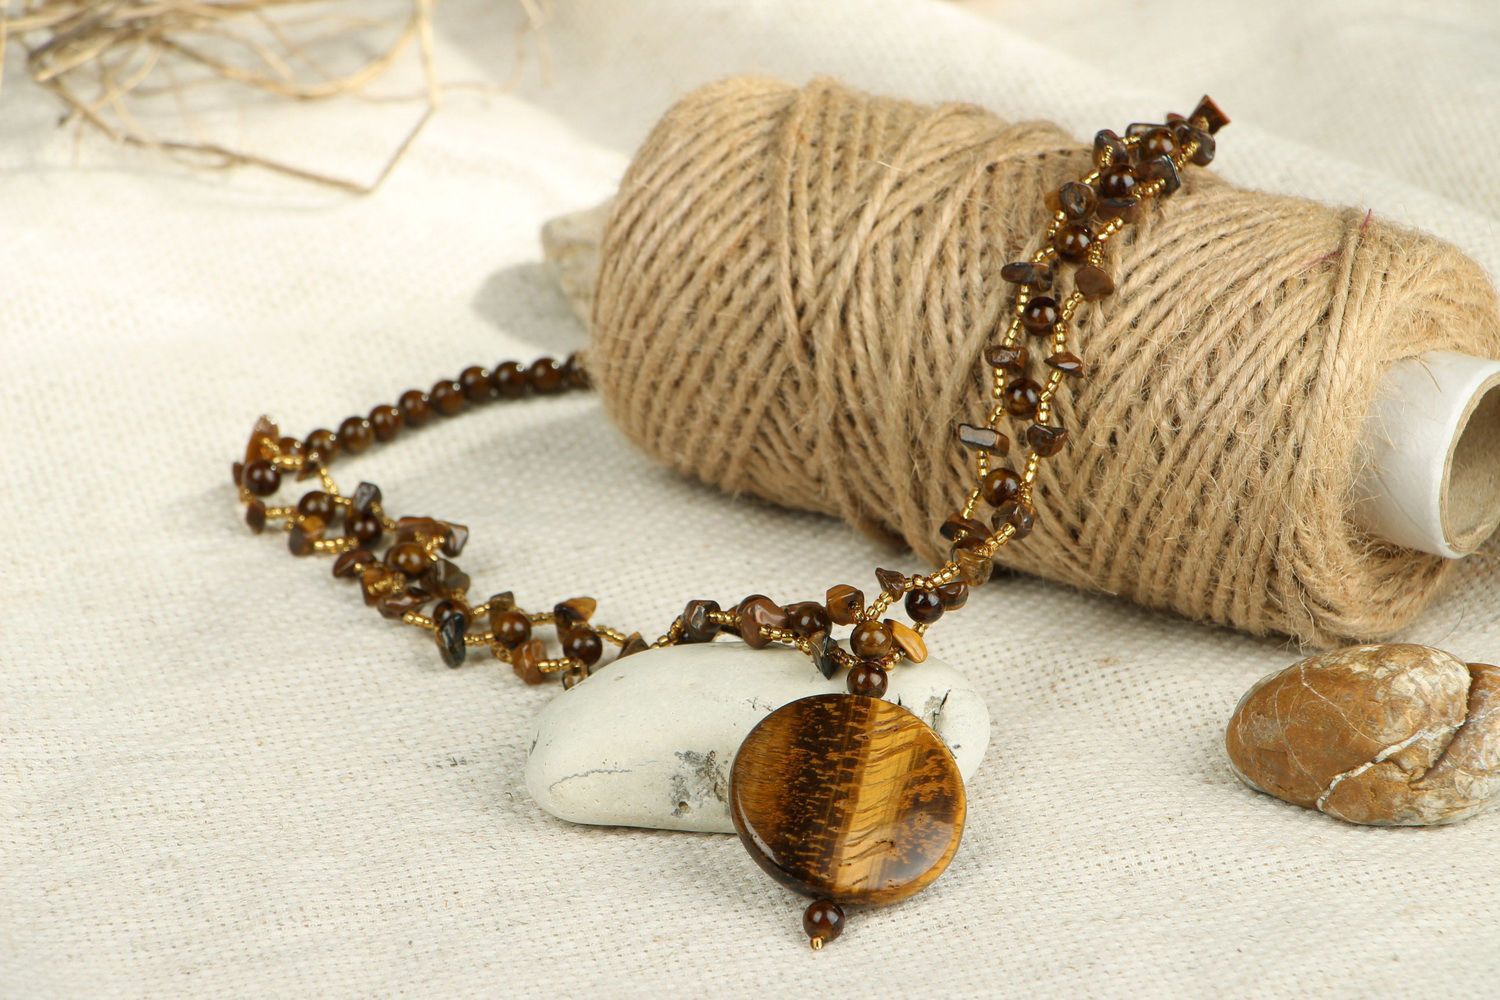 Necklace made of beads and tiger's eye stone photo 4